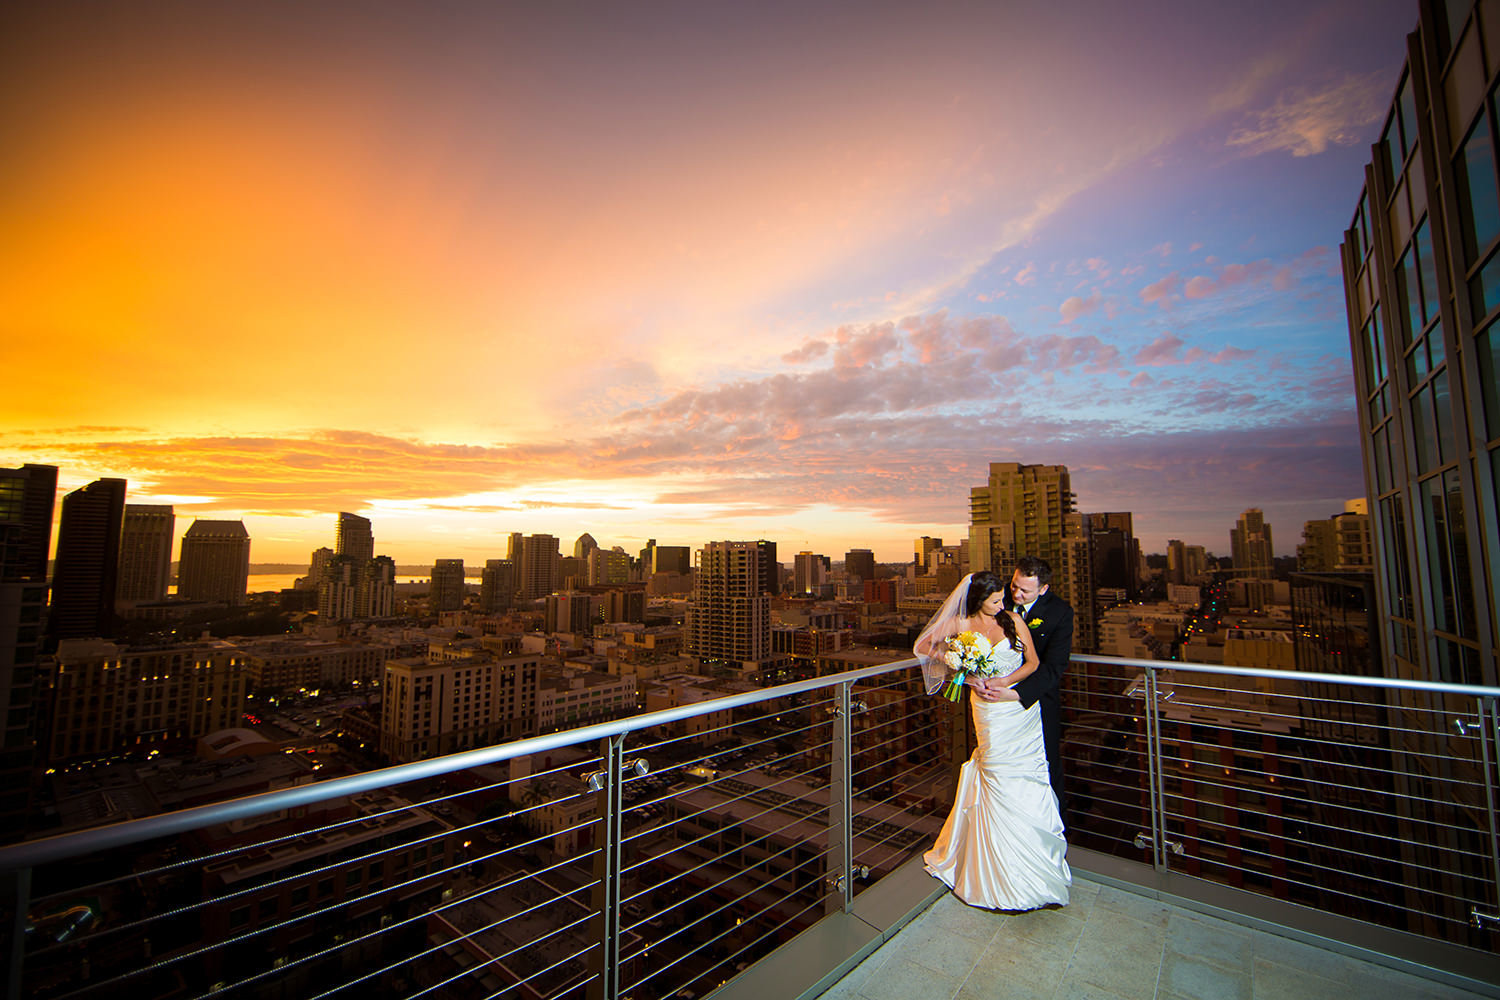 Romantic portrait with surreal sunset over the downtown San Diego skyline.